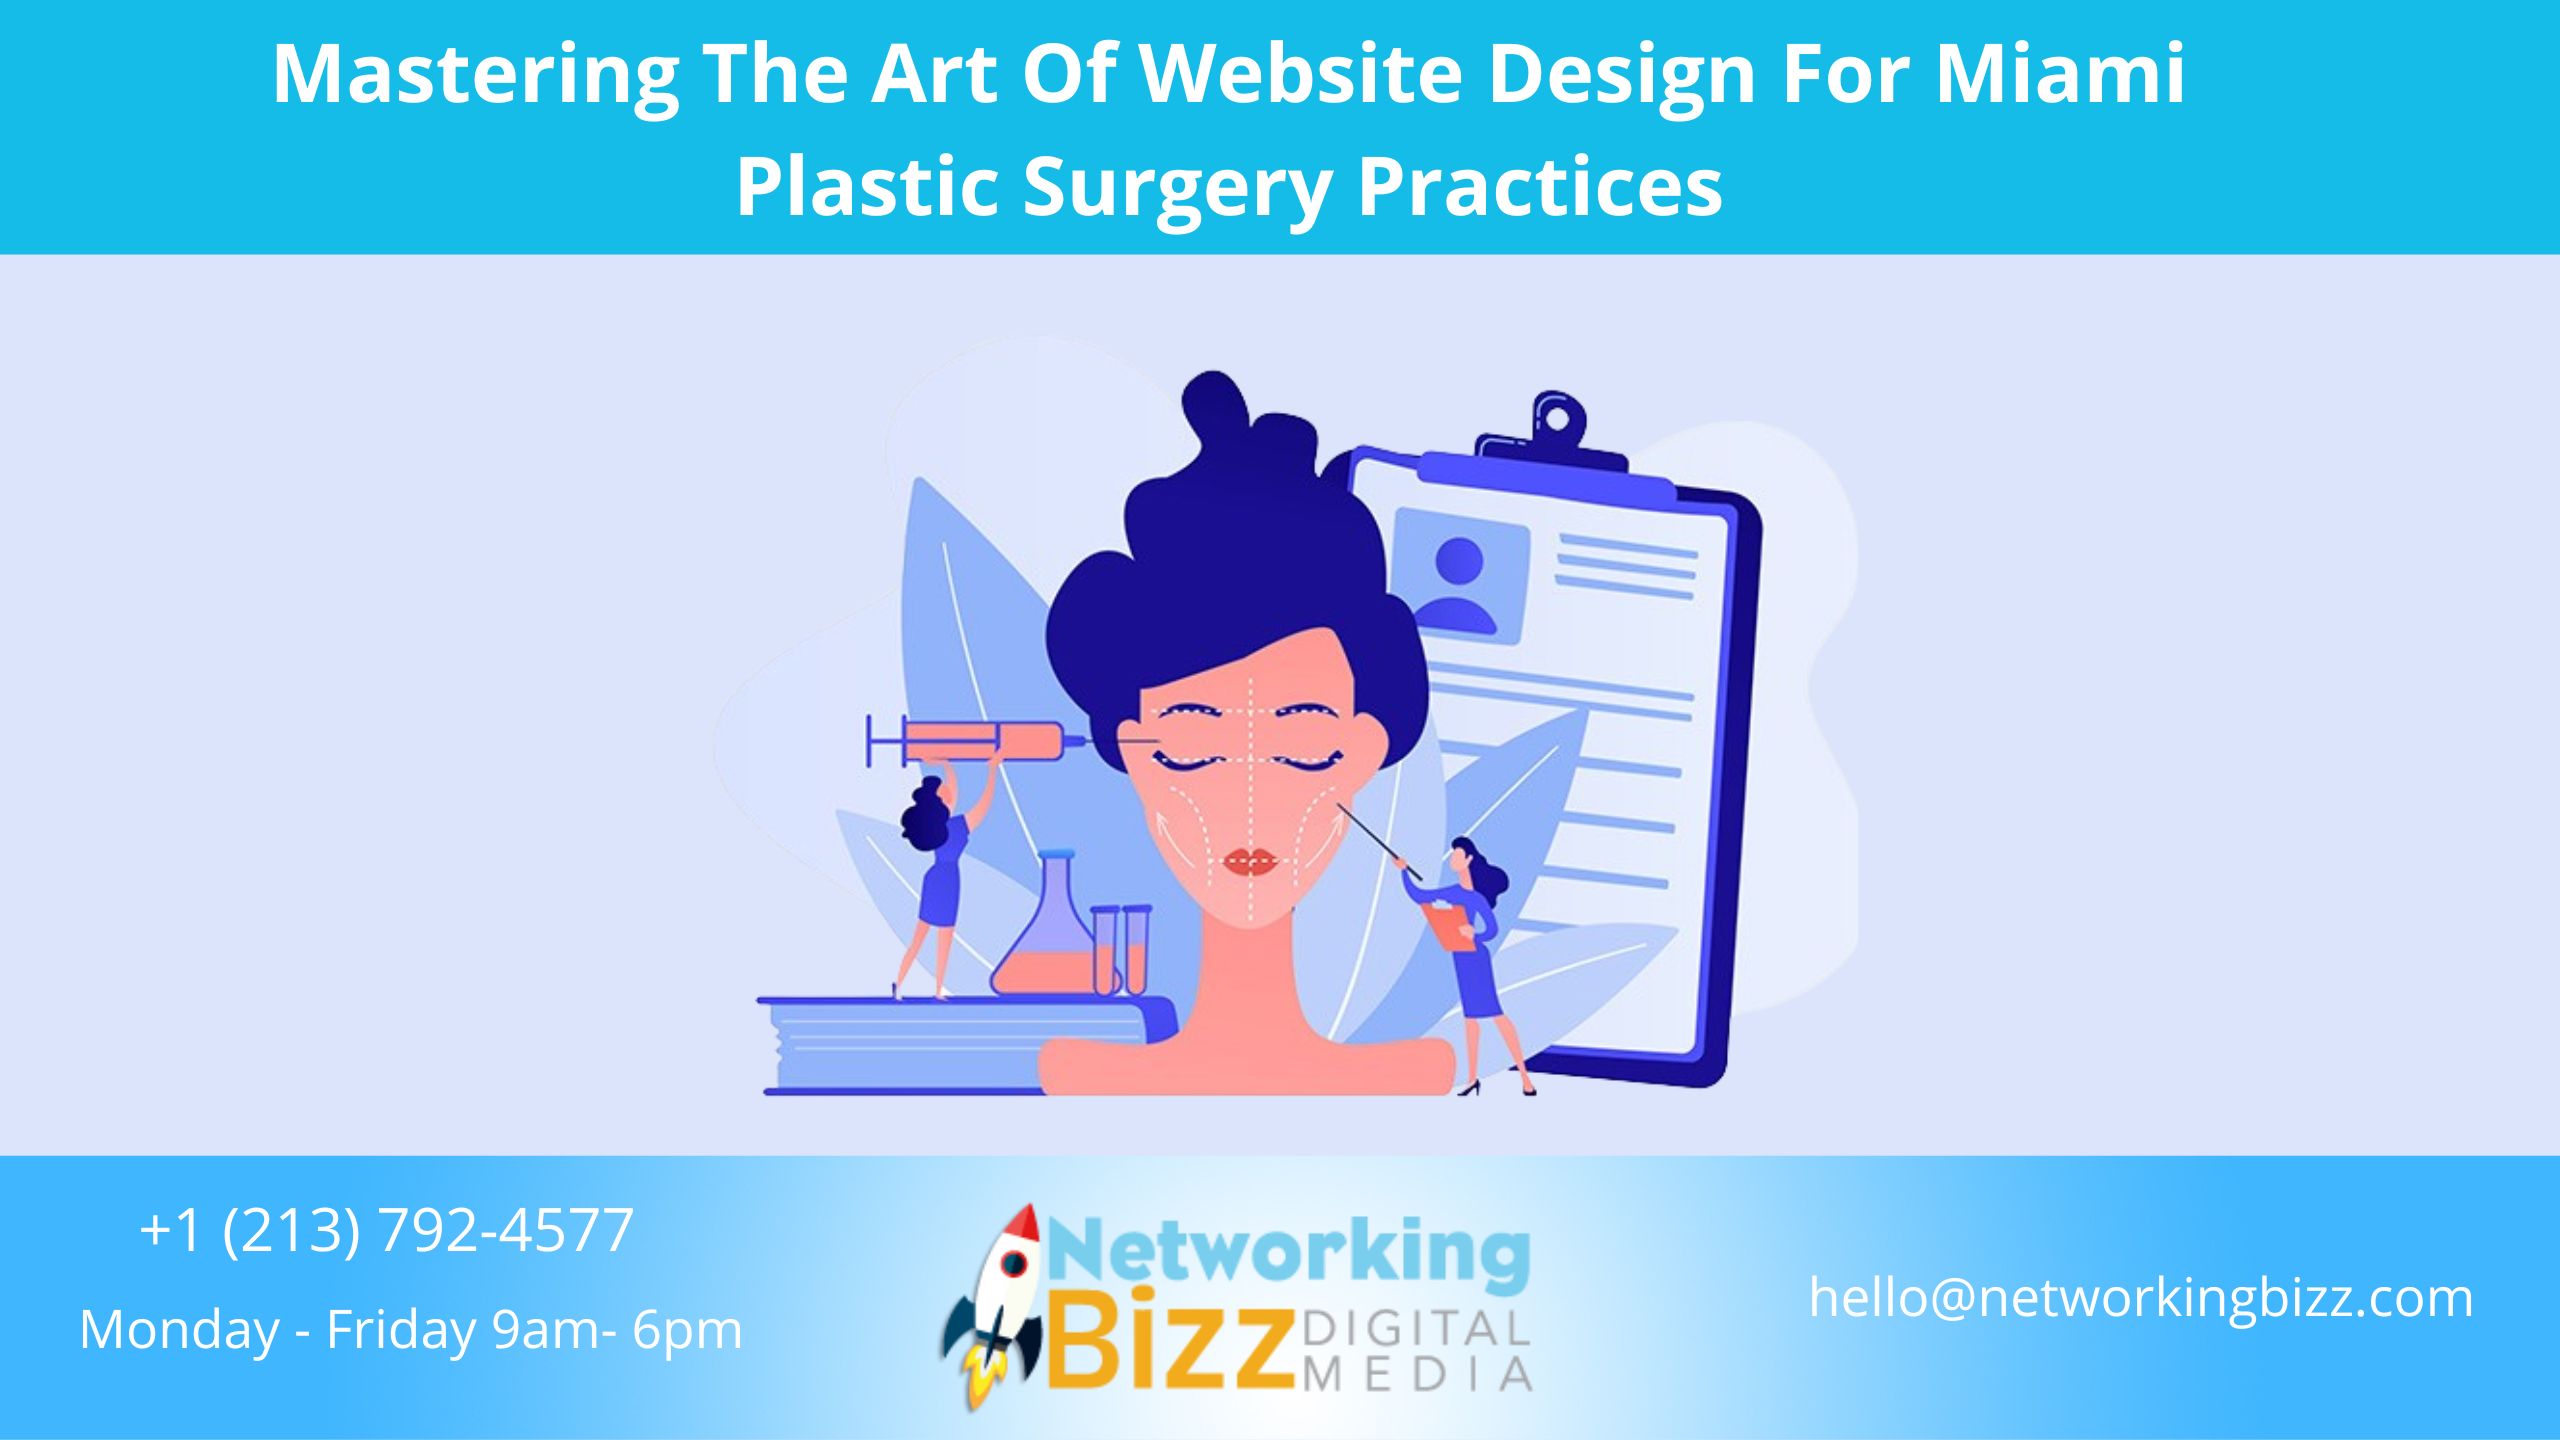 Mastering The Art Of Website Design For Miami Plastic Surgery Practices